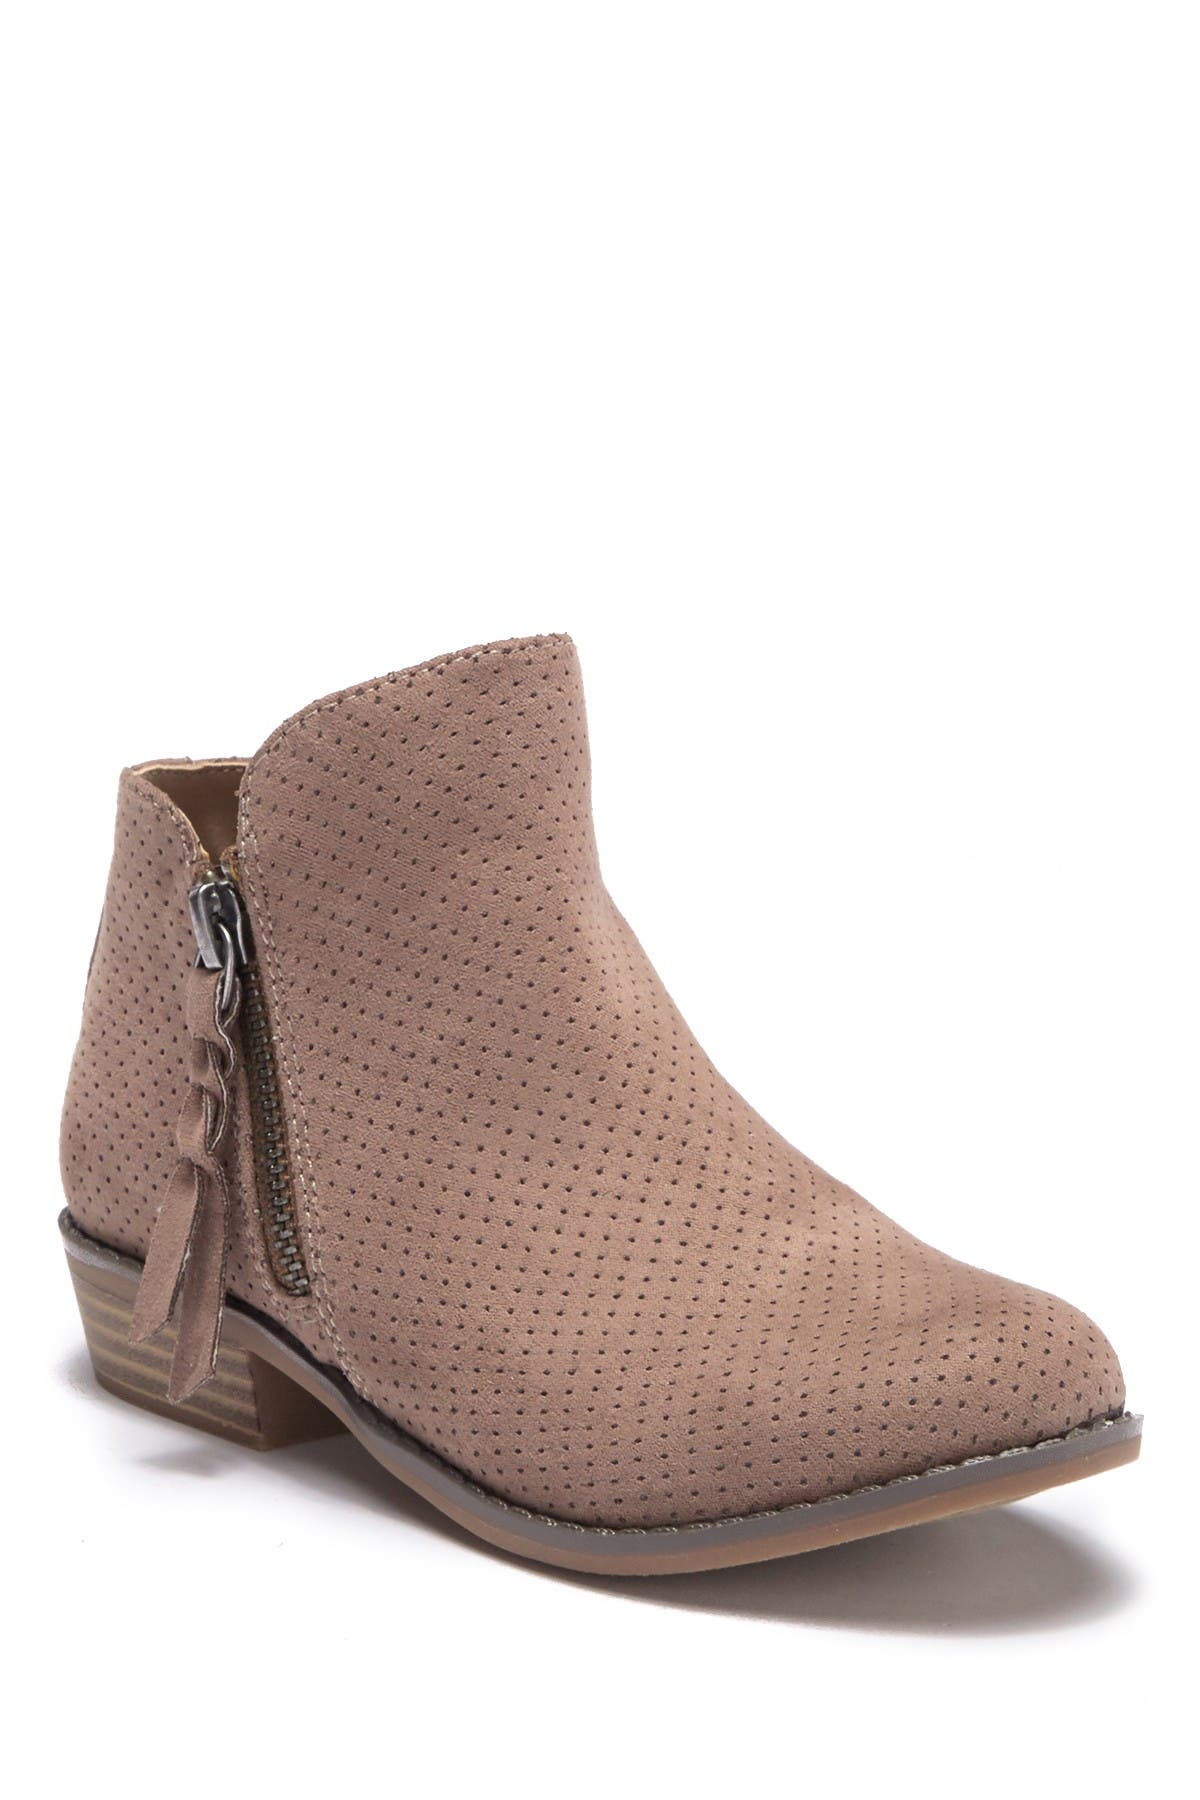 Dolce Vita | Sassy Perforated Bootie 